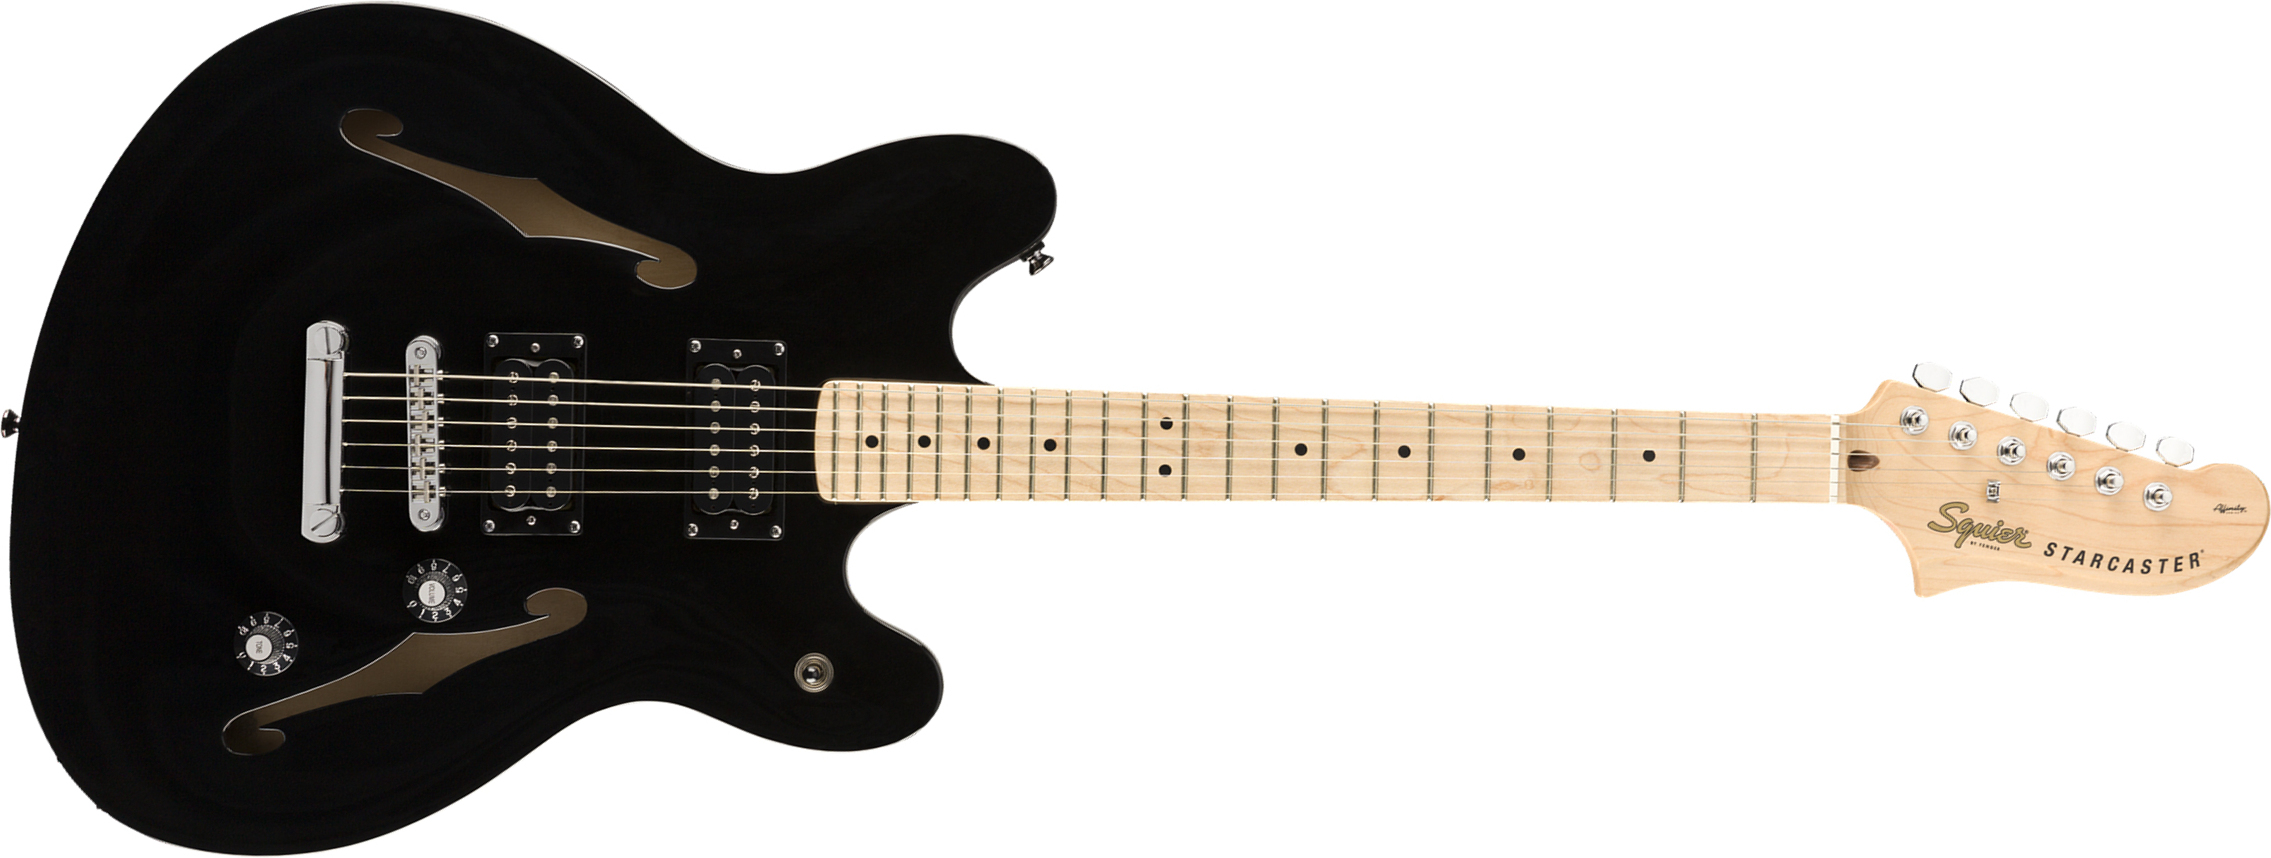 Squier Starcaster Affinity 2019 Hh Ht Mn - Black - Guitarra electrica retro rock - Main picture